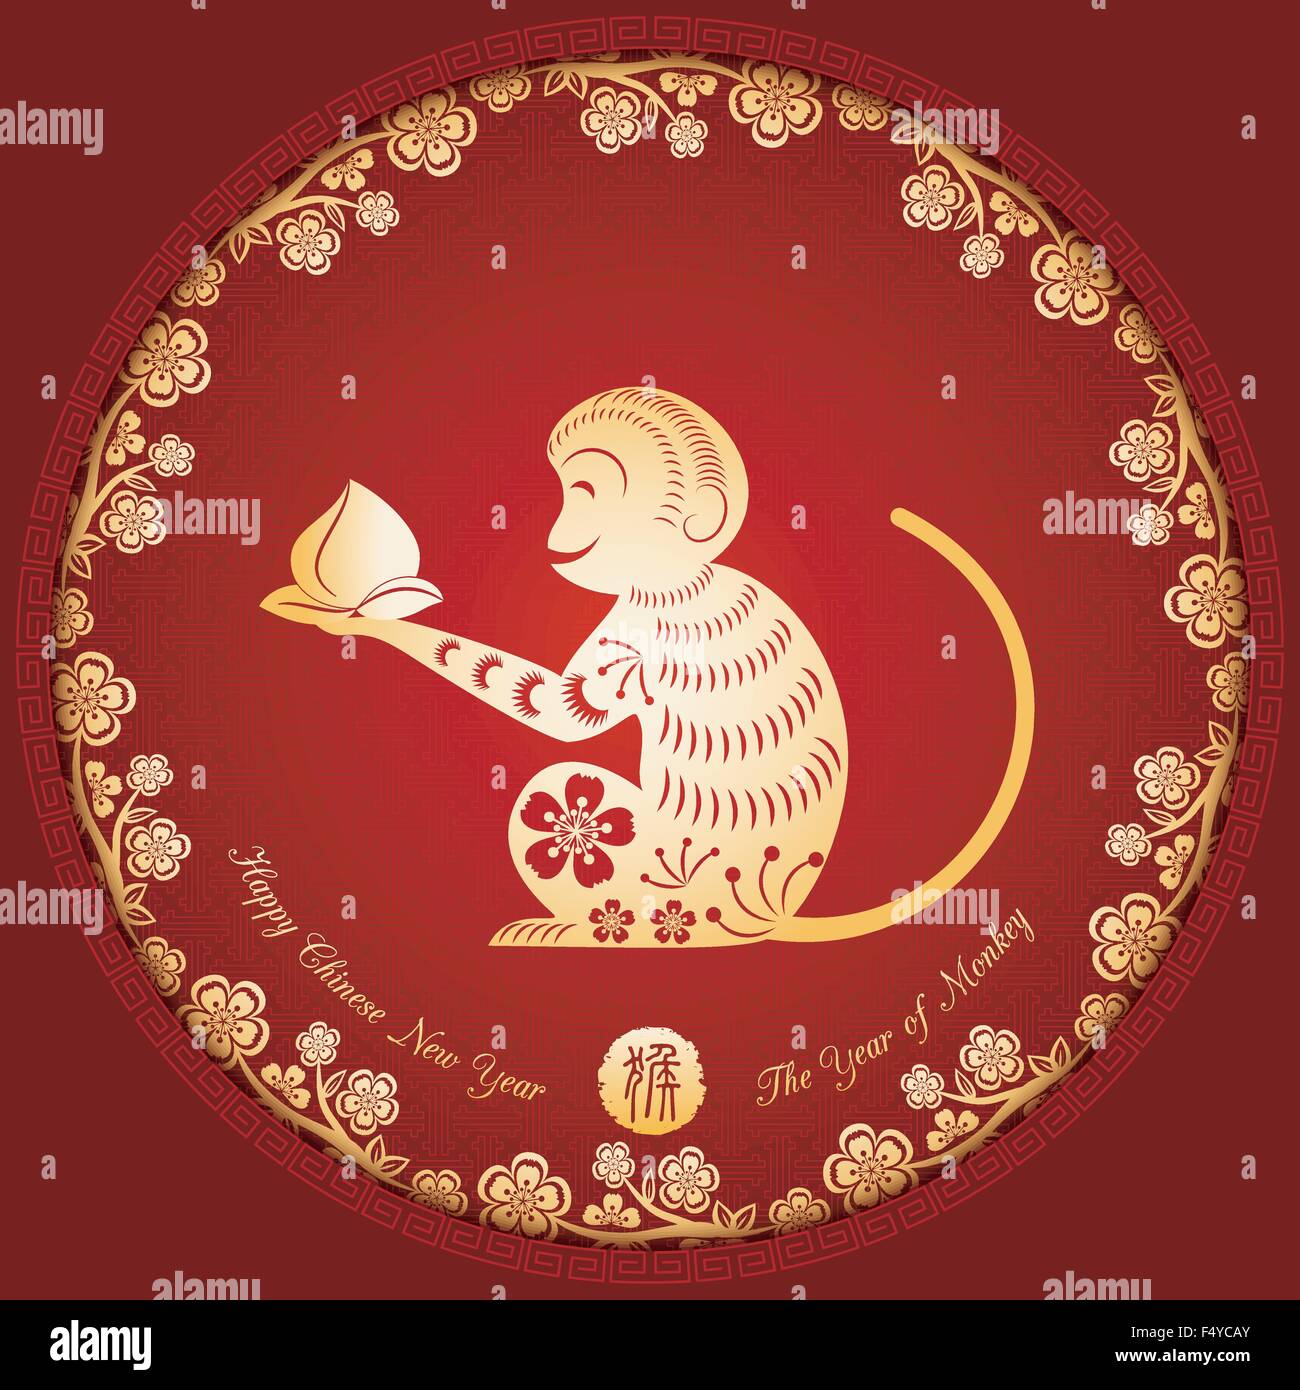 Chinese New Year Golden Monkey Background Stock Vector